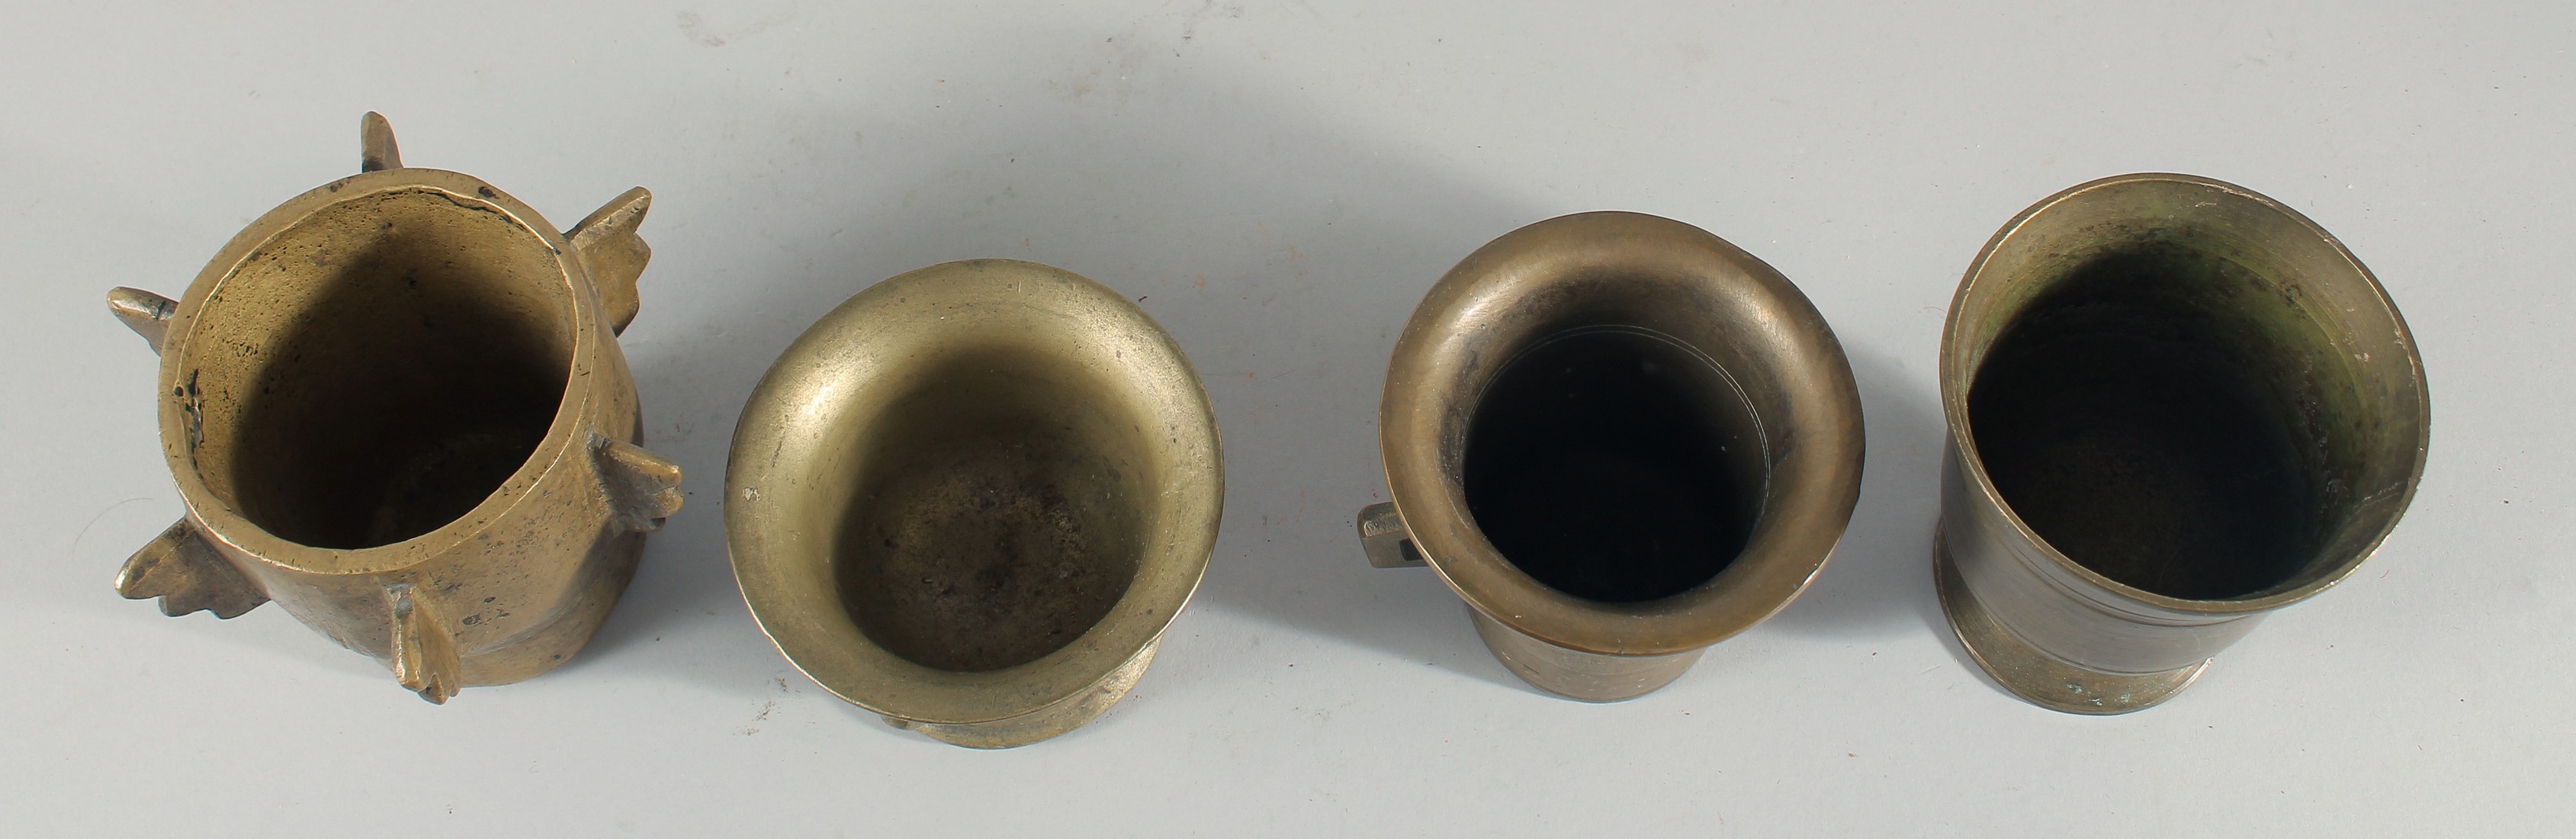 A COLLECTION OF FOUR BRONZE PESTLE AND MORTARS, (eight pieces). - Image 3 of 5